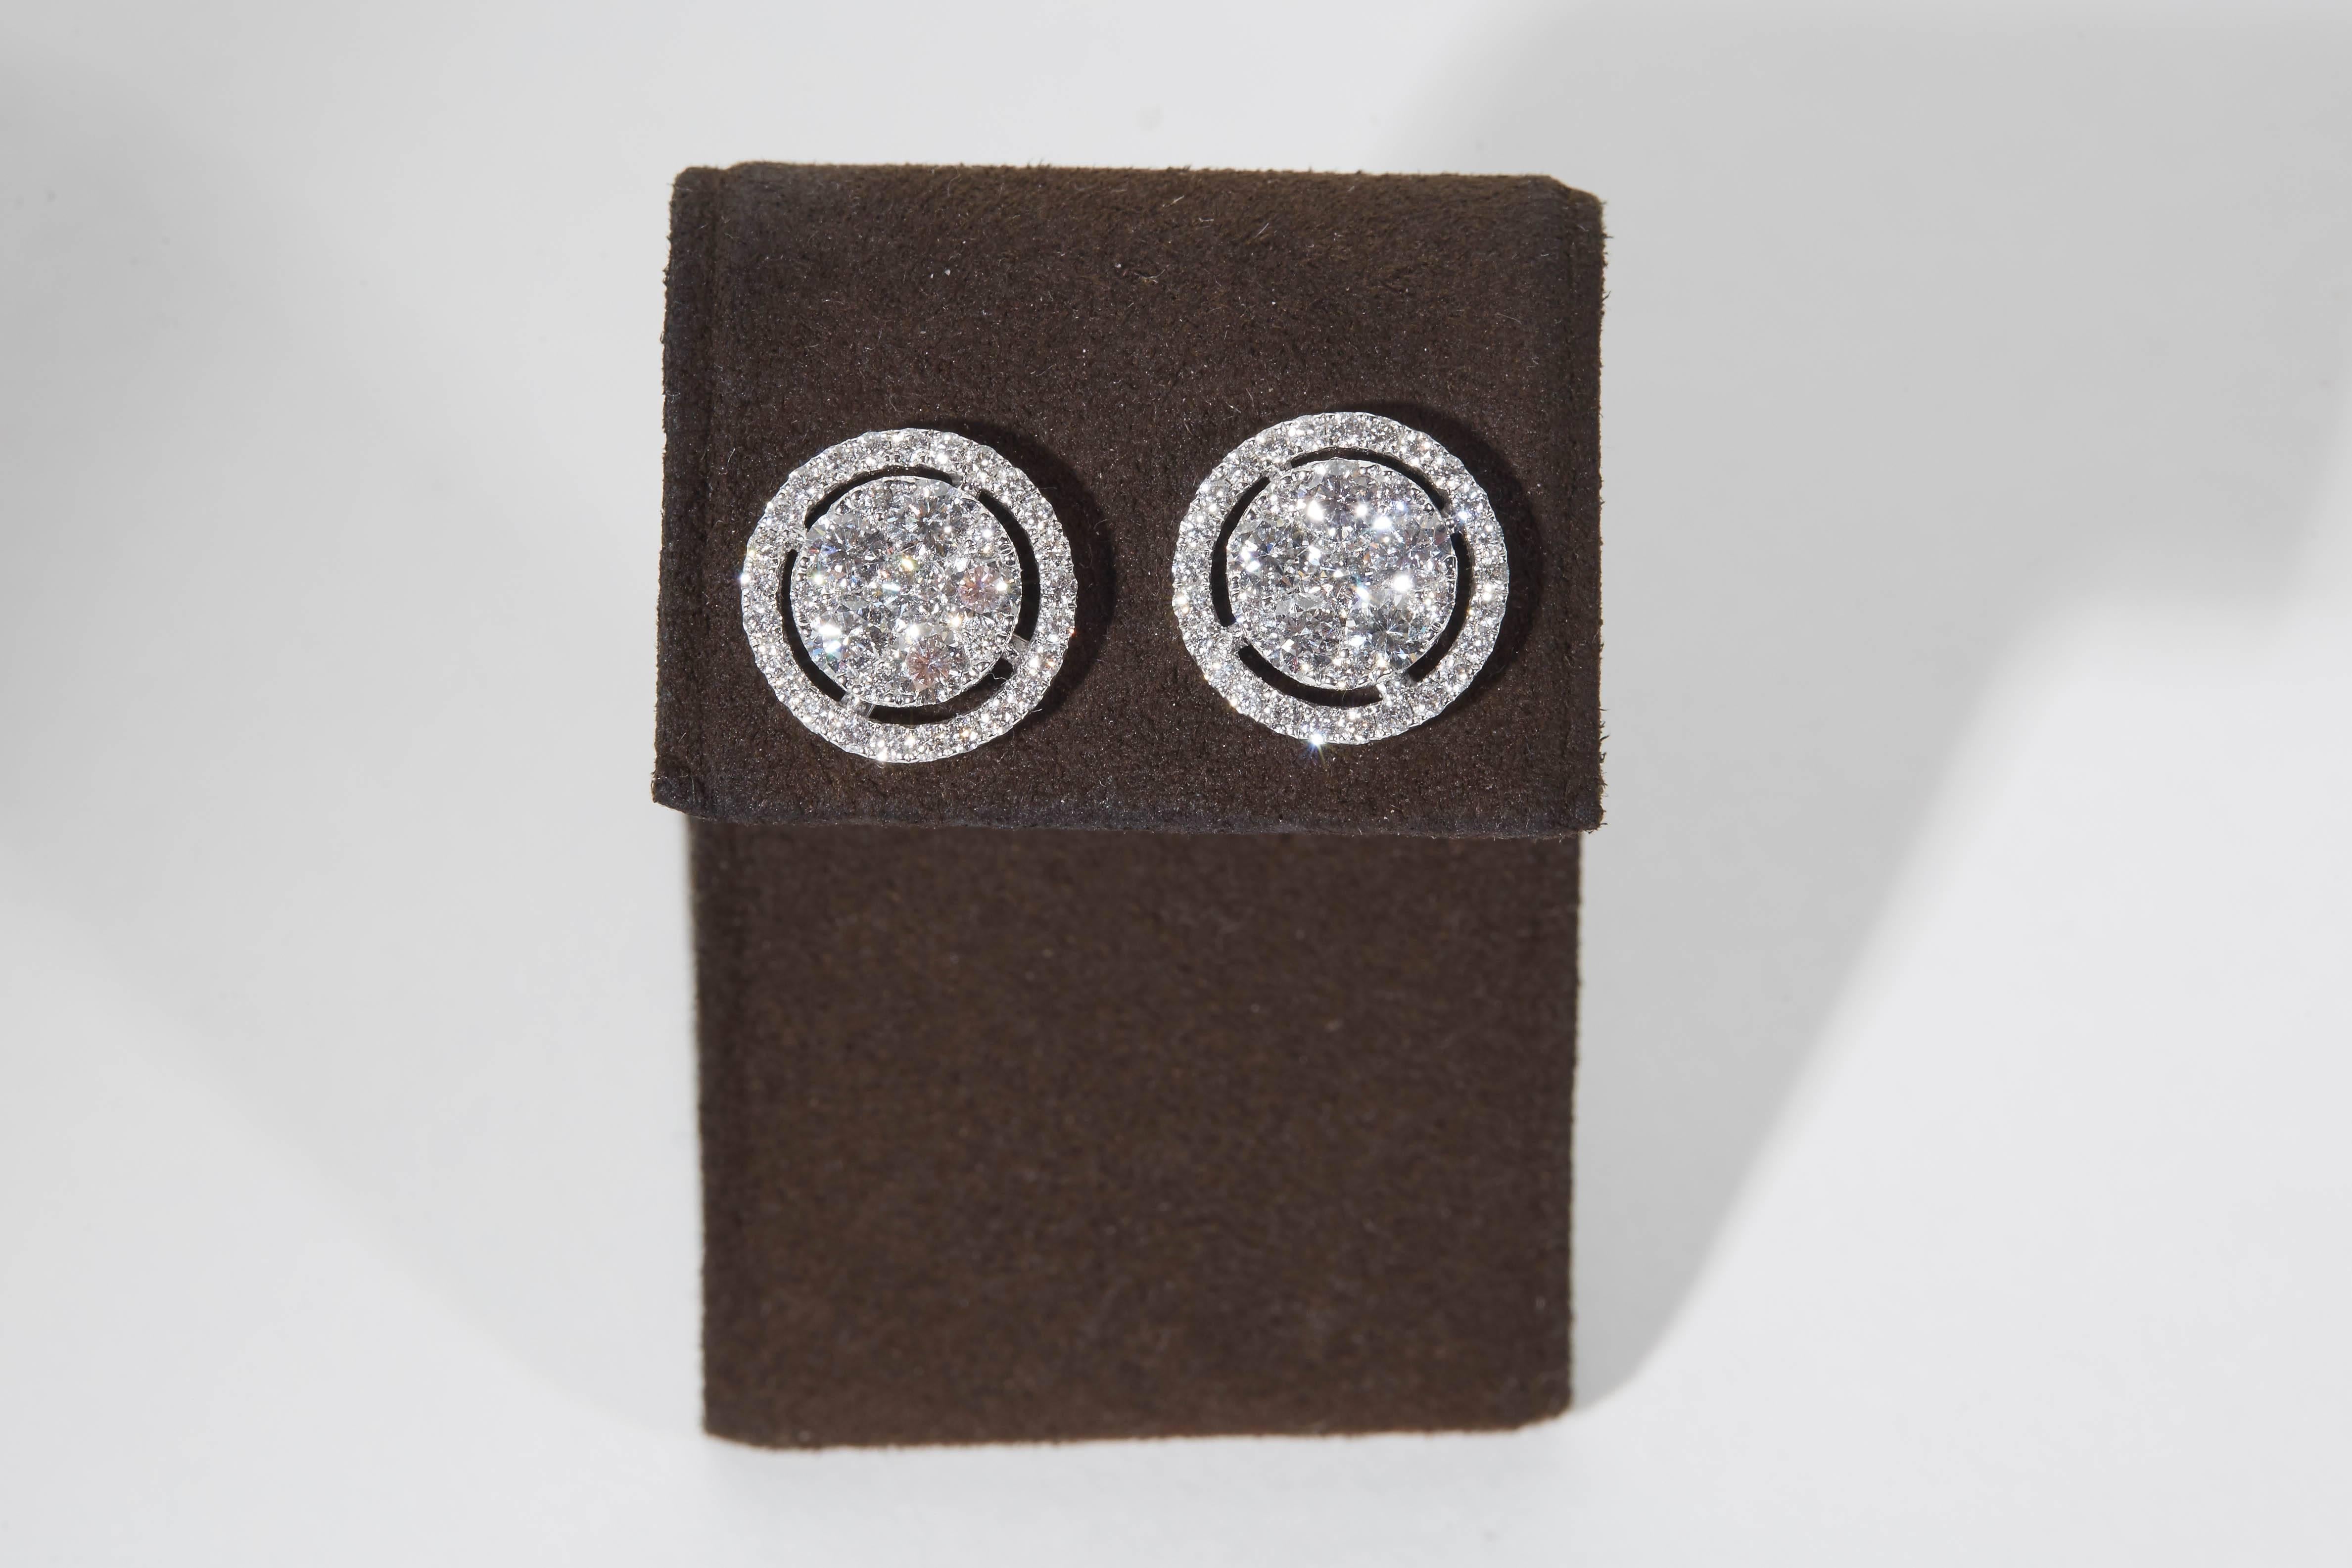 
A stunning pair of diamond stud earrings!

Made up of the highest round brilliant cut diamonds these studs have so much fire and brilliance. 

1.94 carats of colorless white VS diamonds set in 18k white gold.

Approximately half an inch in